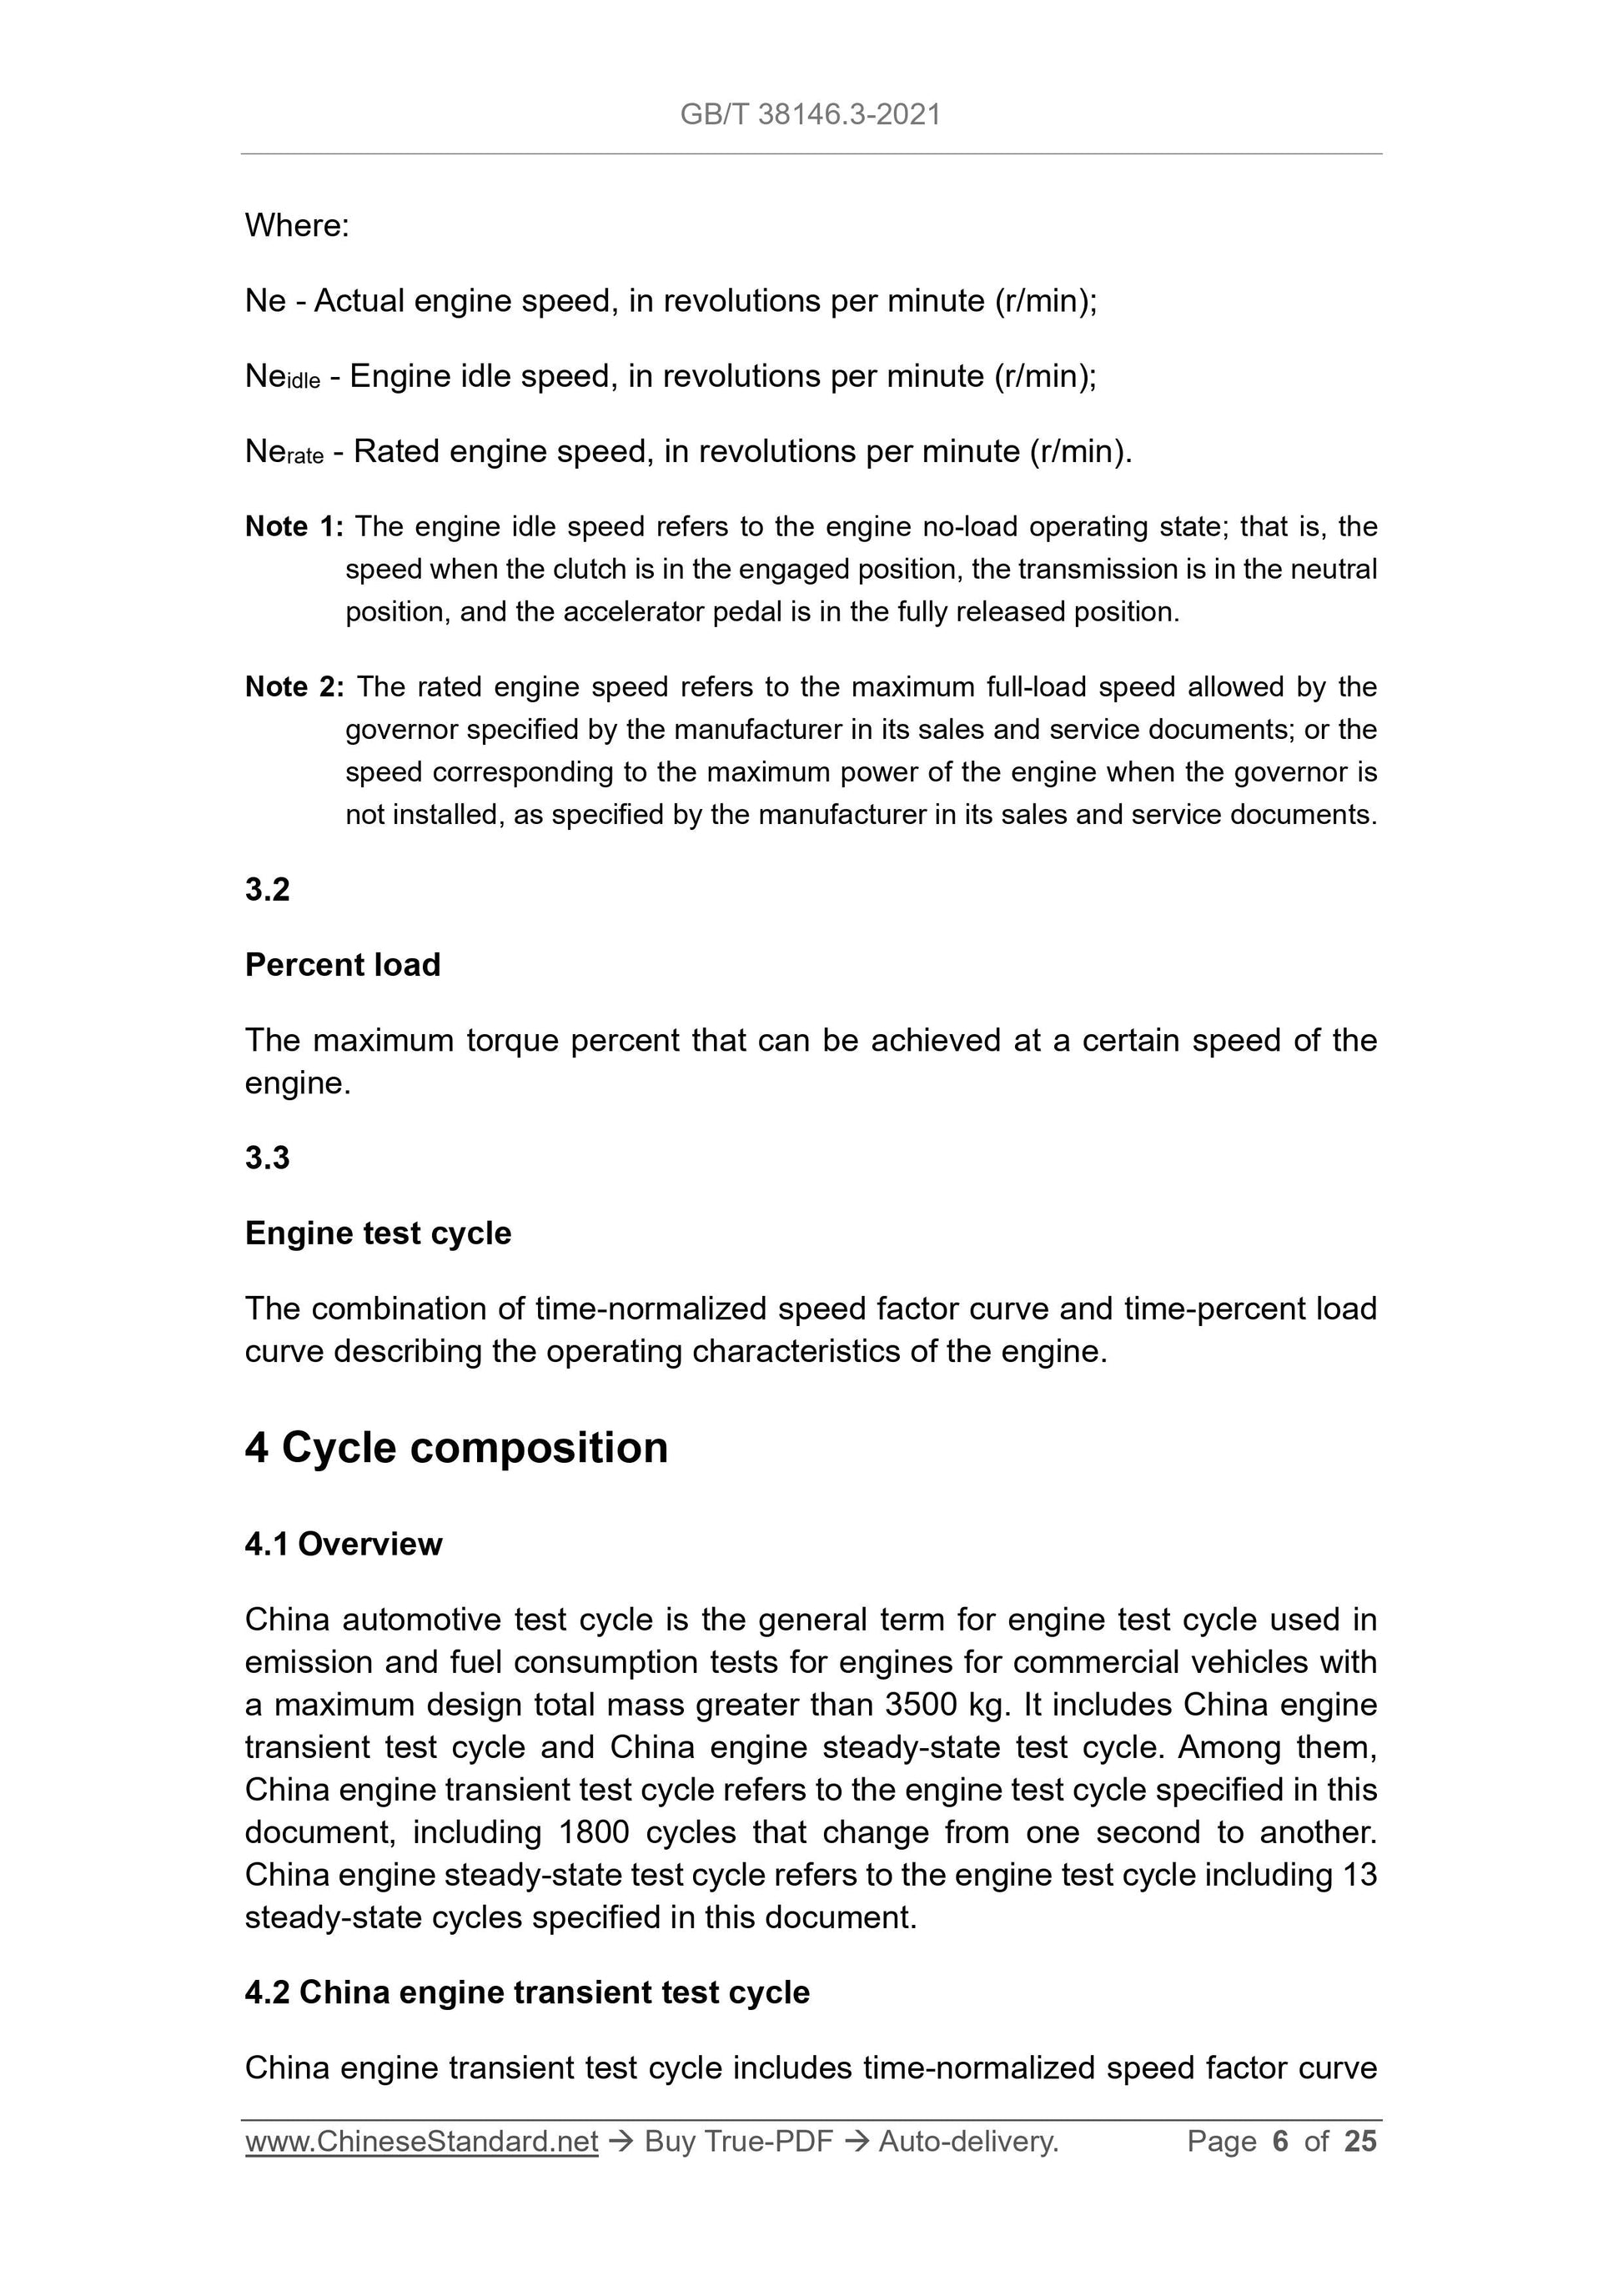 GB/T 38146.3-2021 Page 5